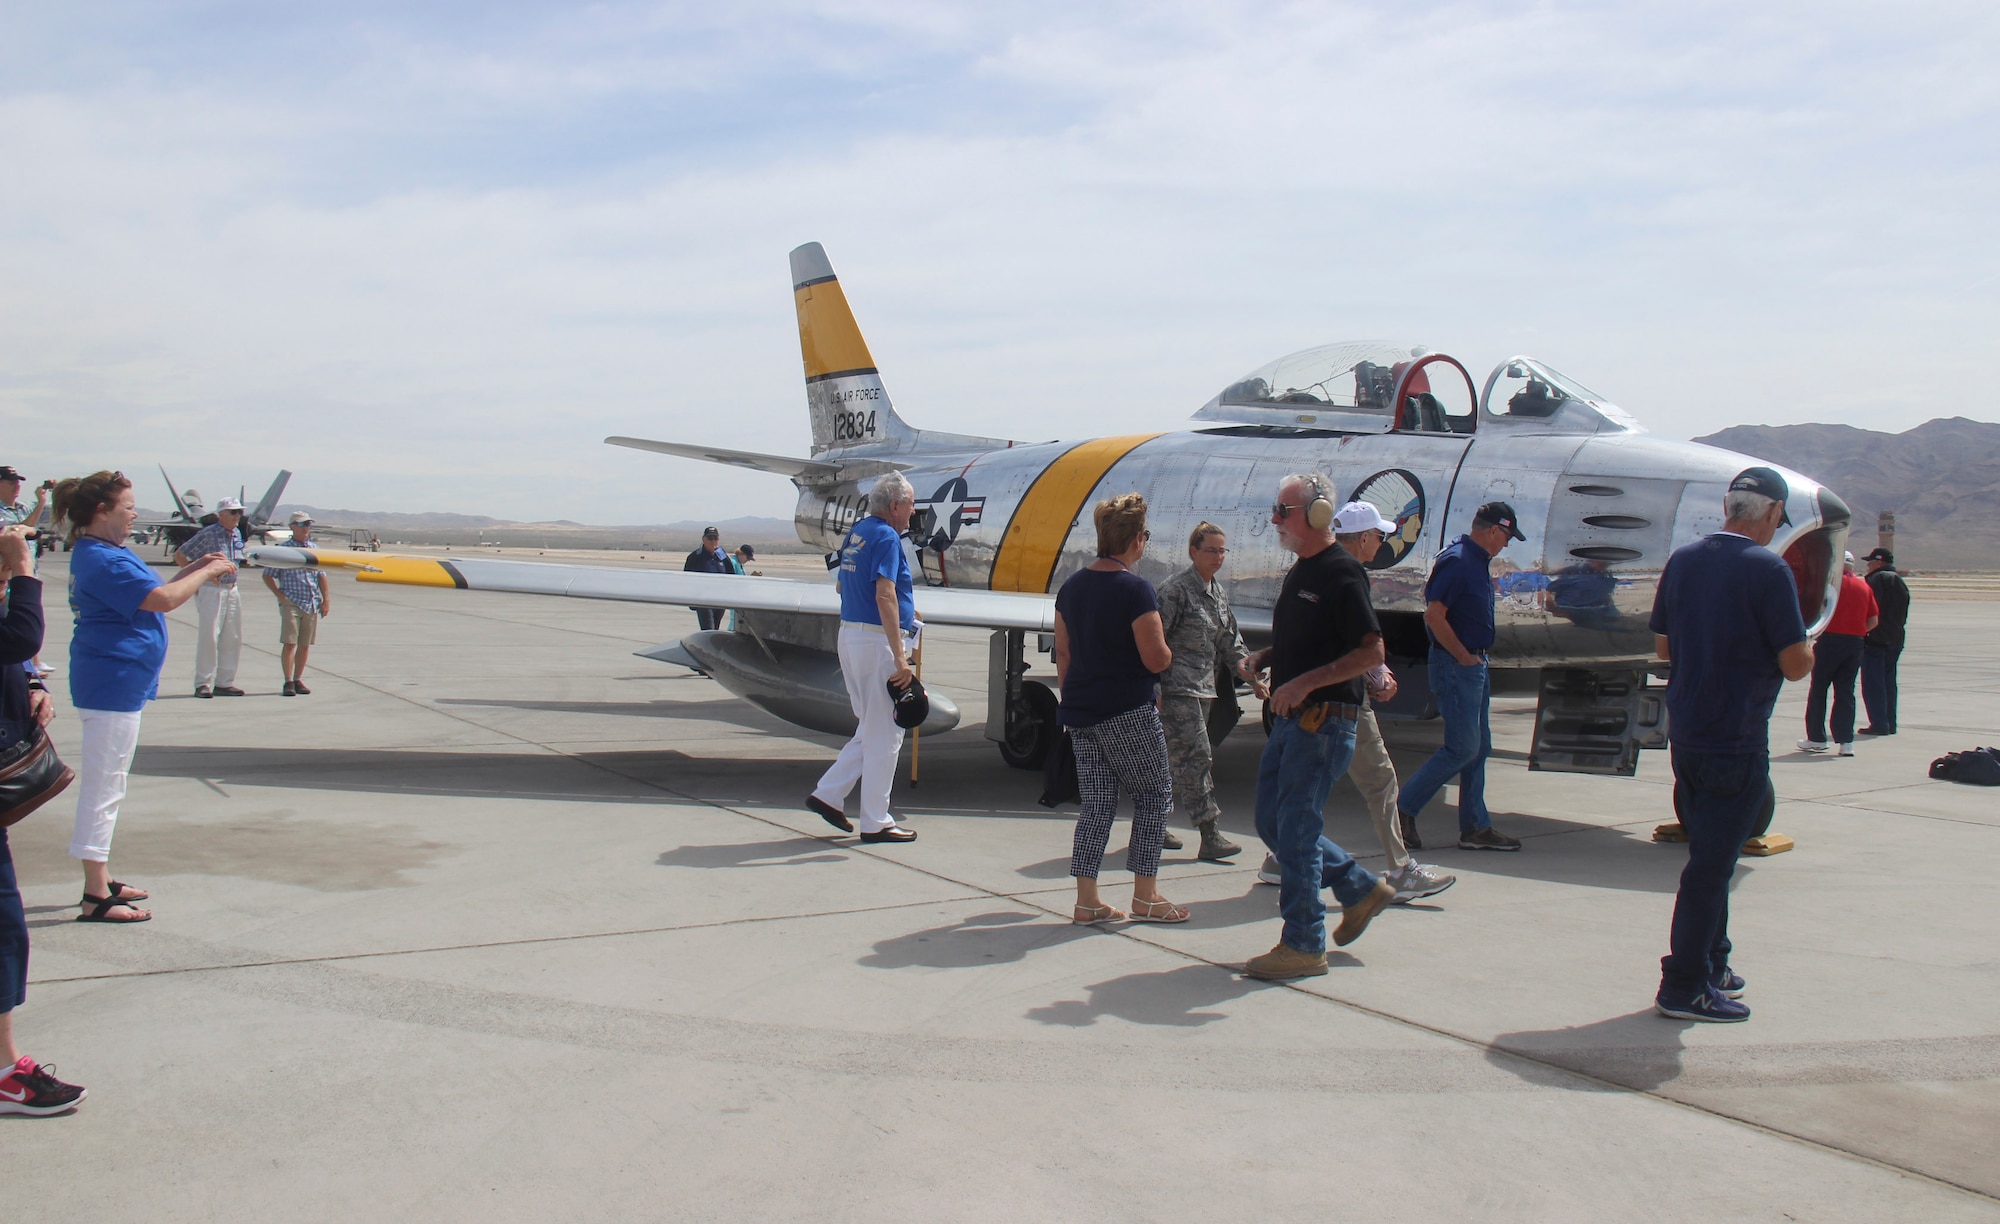 Members of the F-86 Sabre Association view an F-86 Sabre during the group’s last reunion on the flightline at Nellis Air Force Base, Nev., April 24, 2017. The F-86 Sabre was originally designed as a high-altitude fighter, making it highly valued during the Korean War. (U.S. Air Force photo by Susan Garcia/Released) 